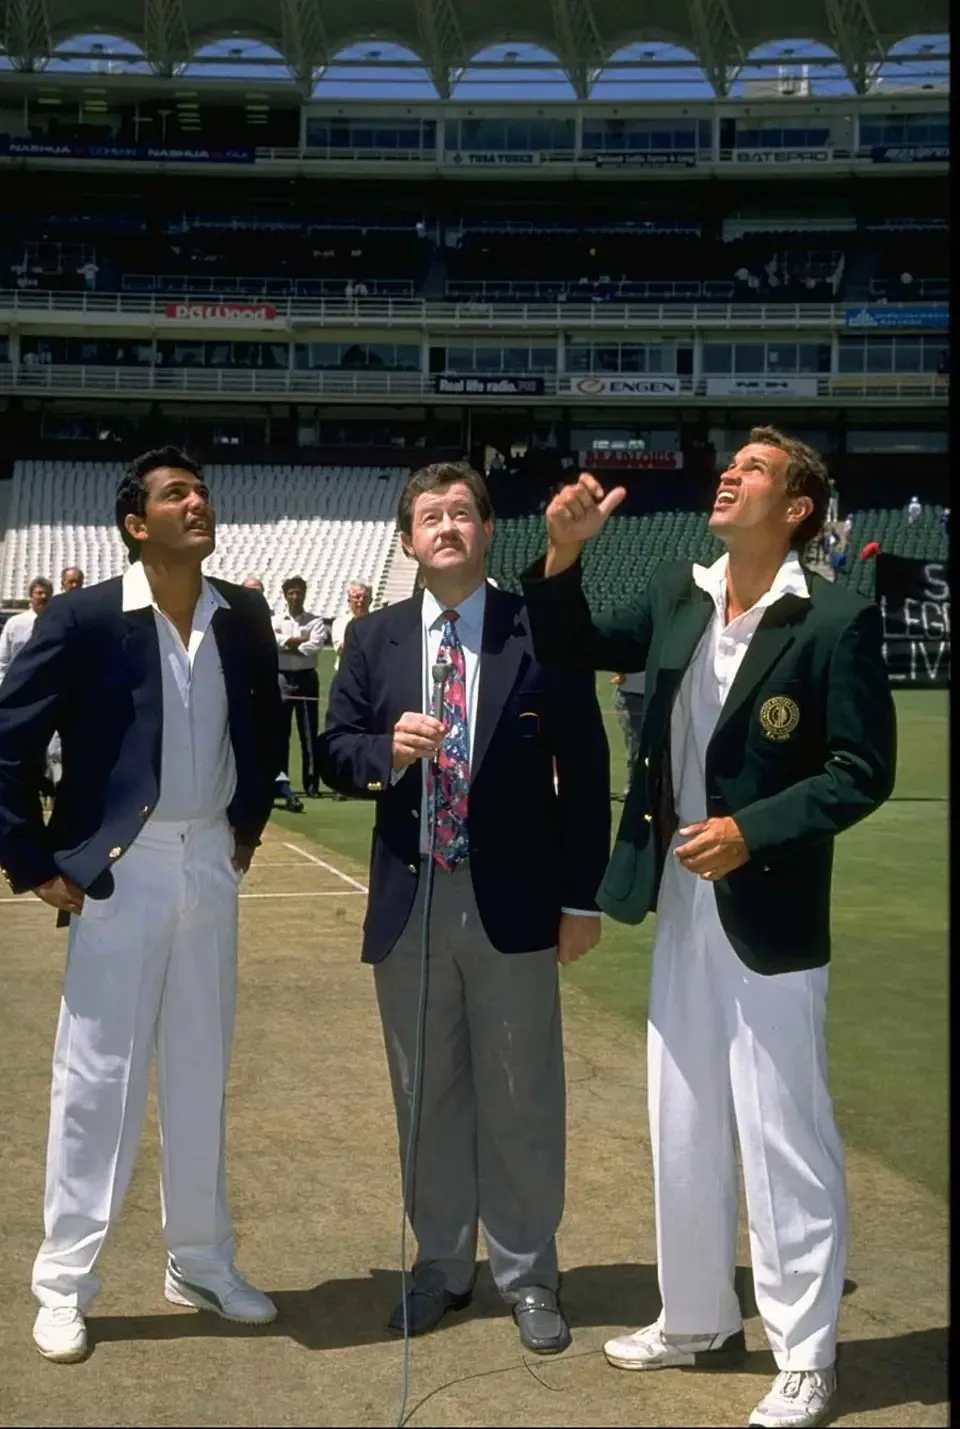 SA vs IND: Mohammad Azharuddin and Kepler Wessels at the toss in Johannesburg  Image - Getty